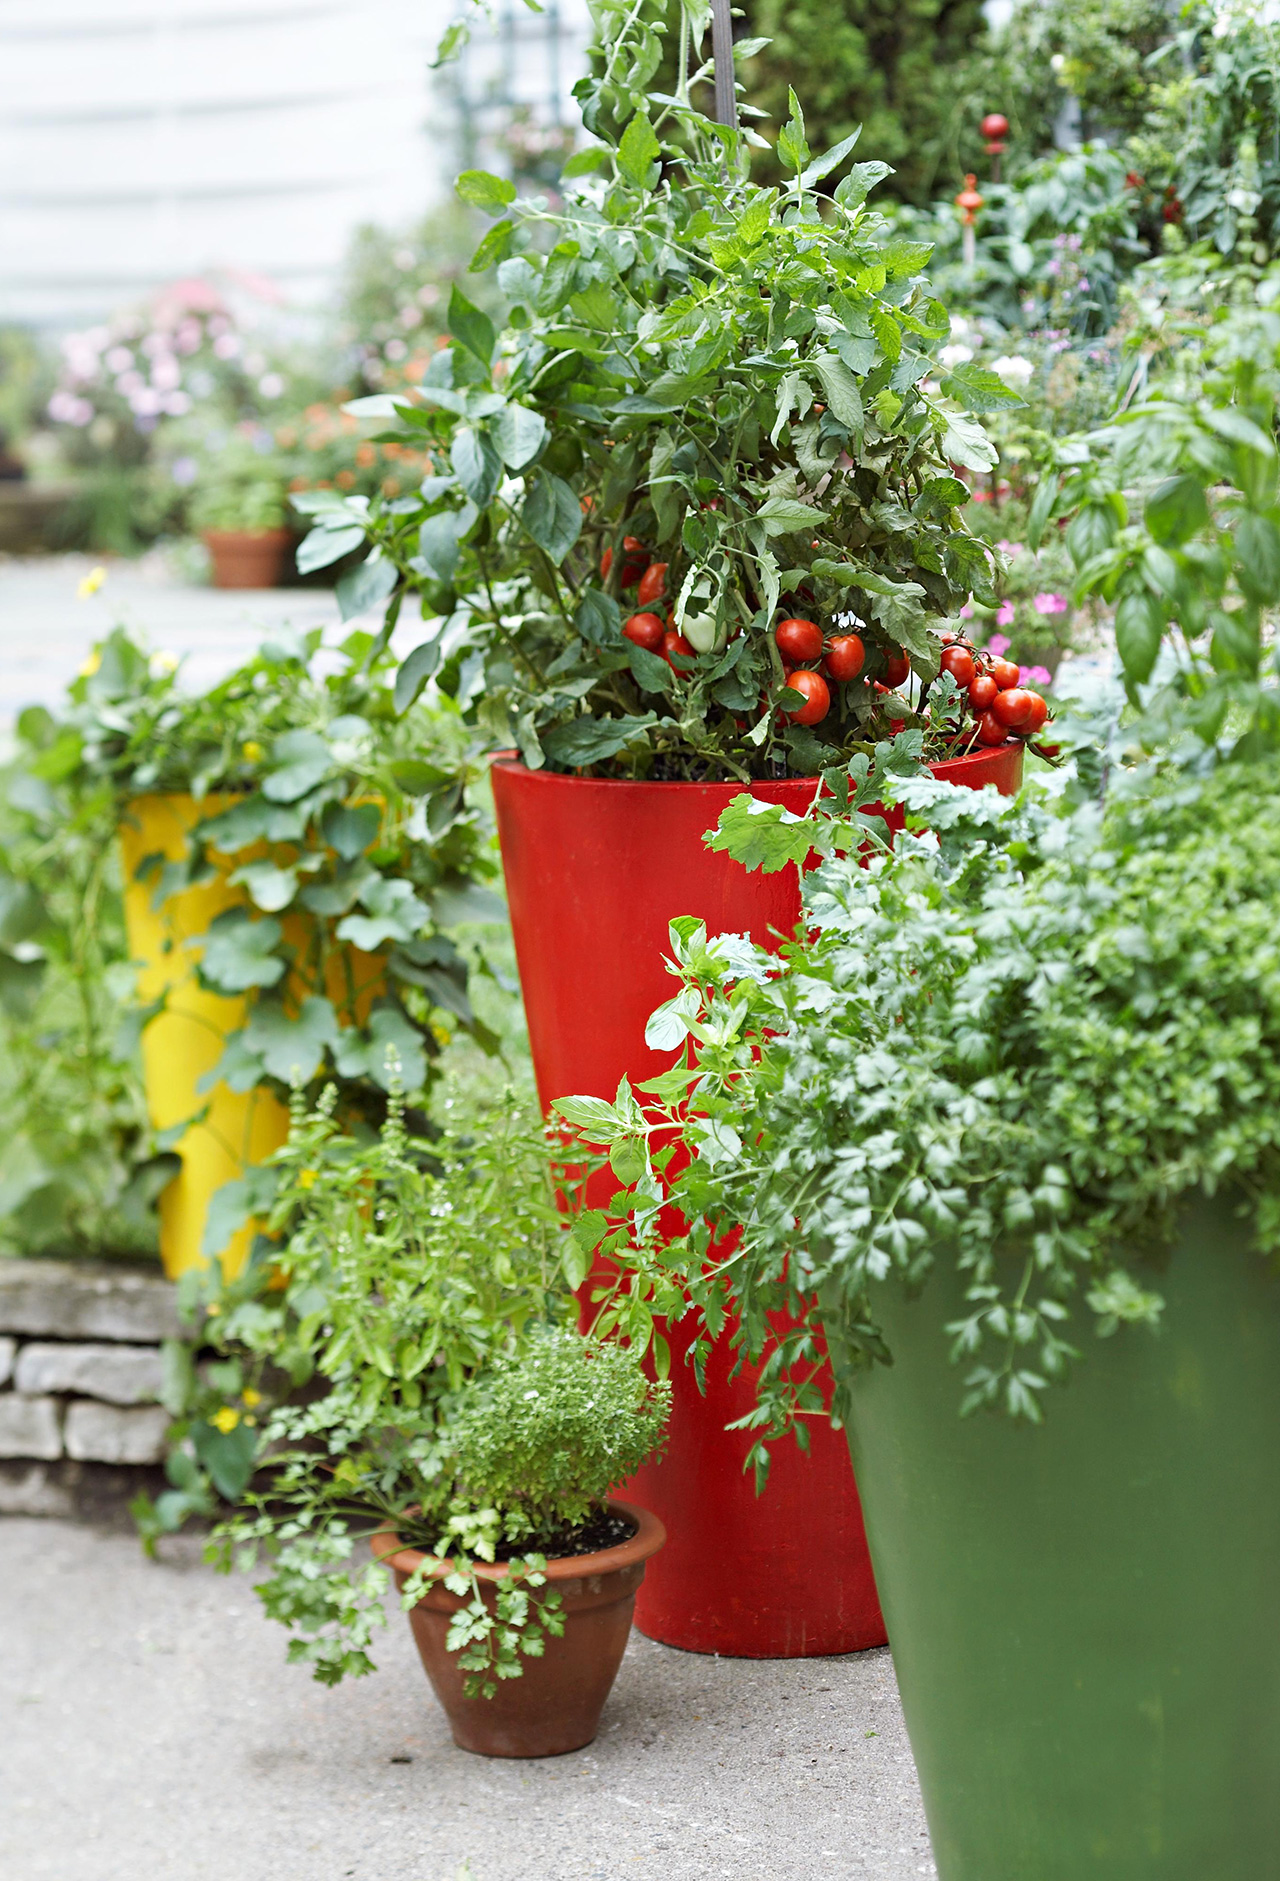 A variety of container gardens